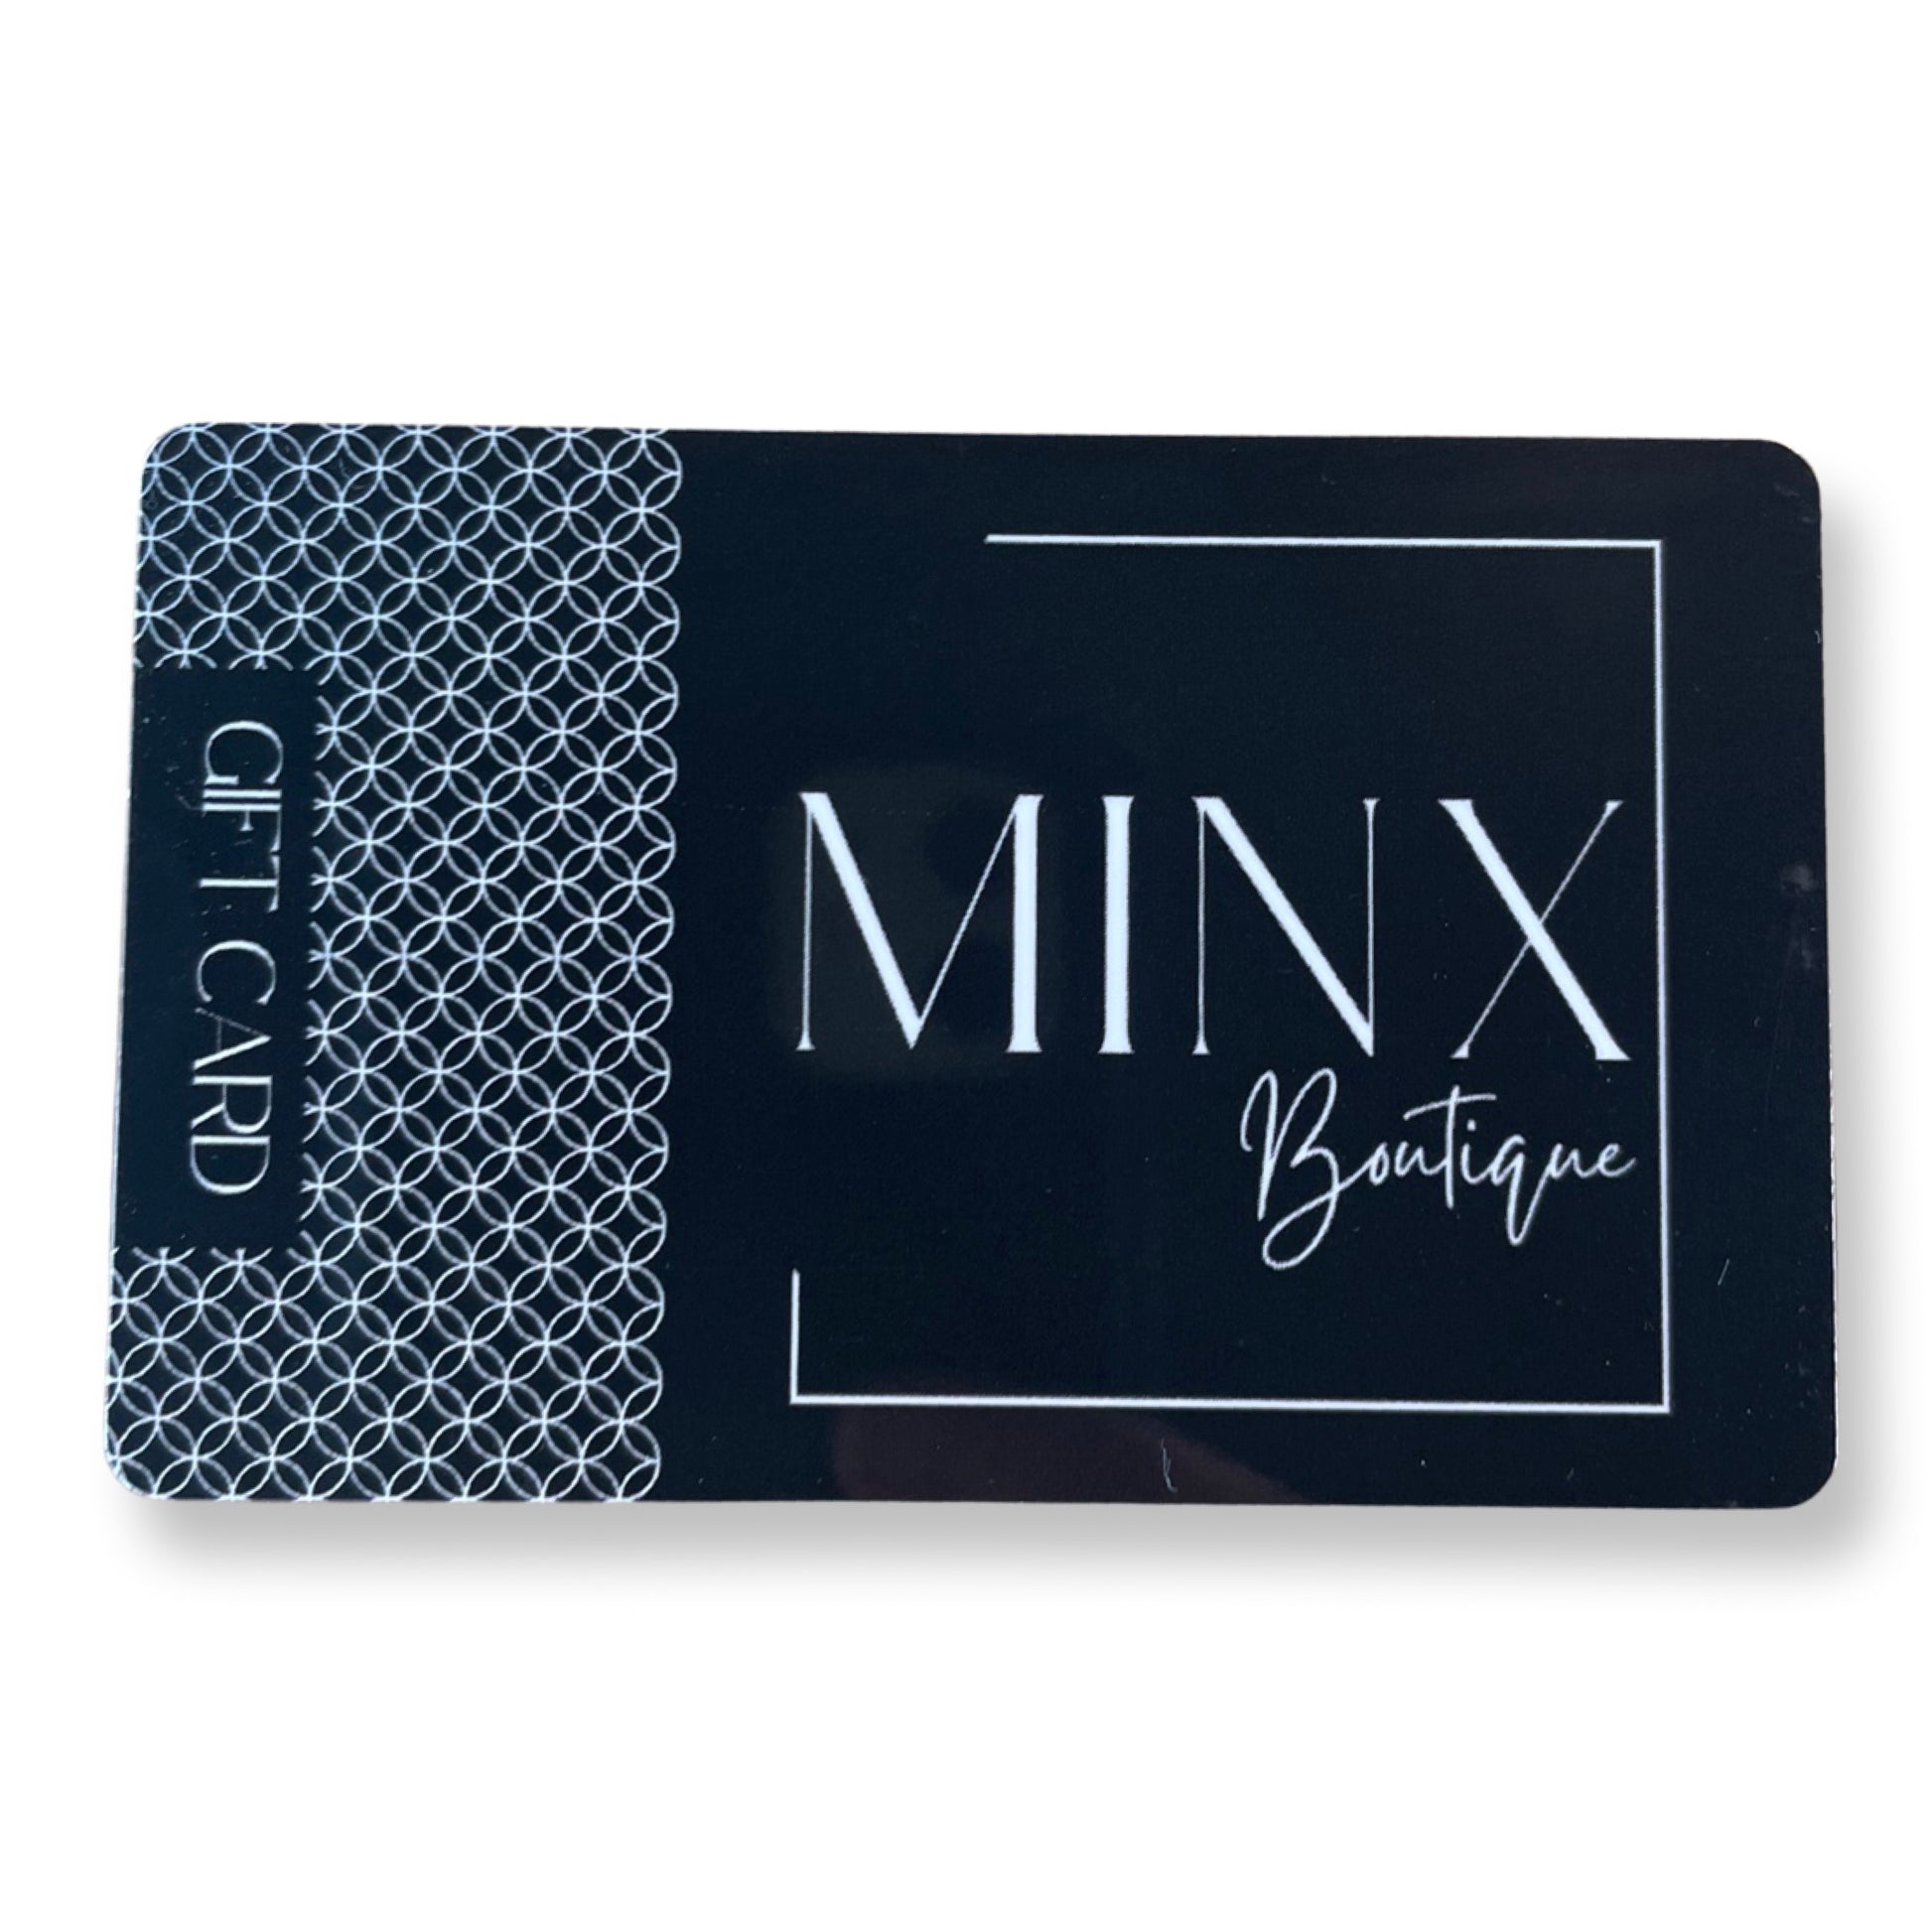 Minx Boutique Gift Card Gift Card